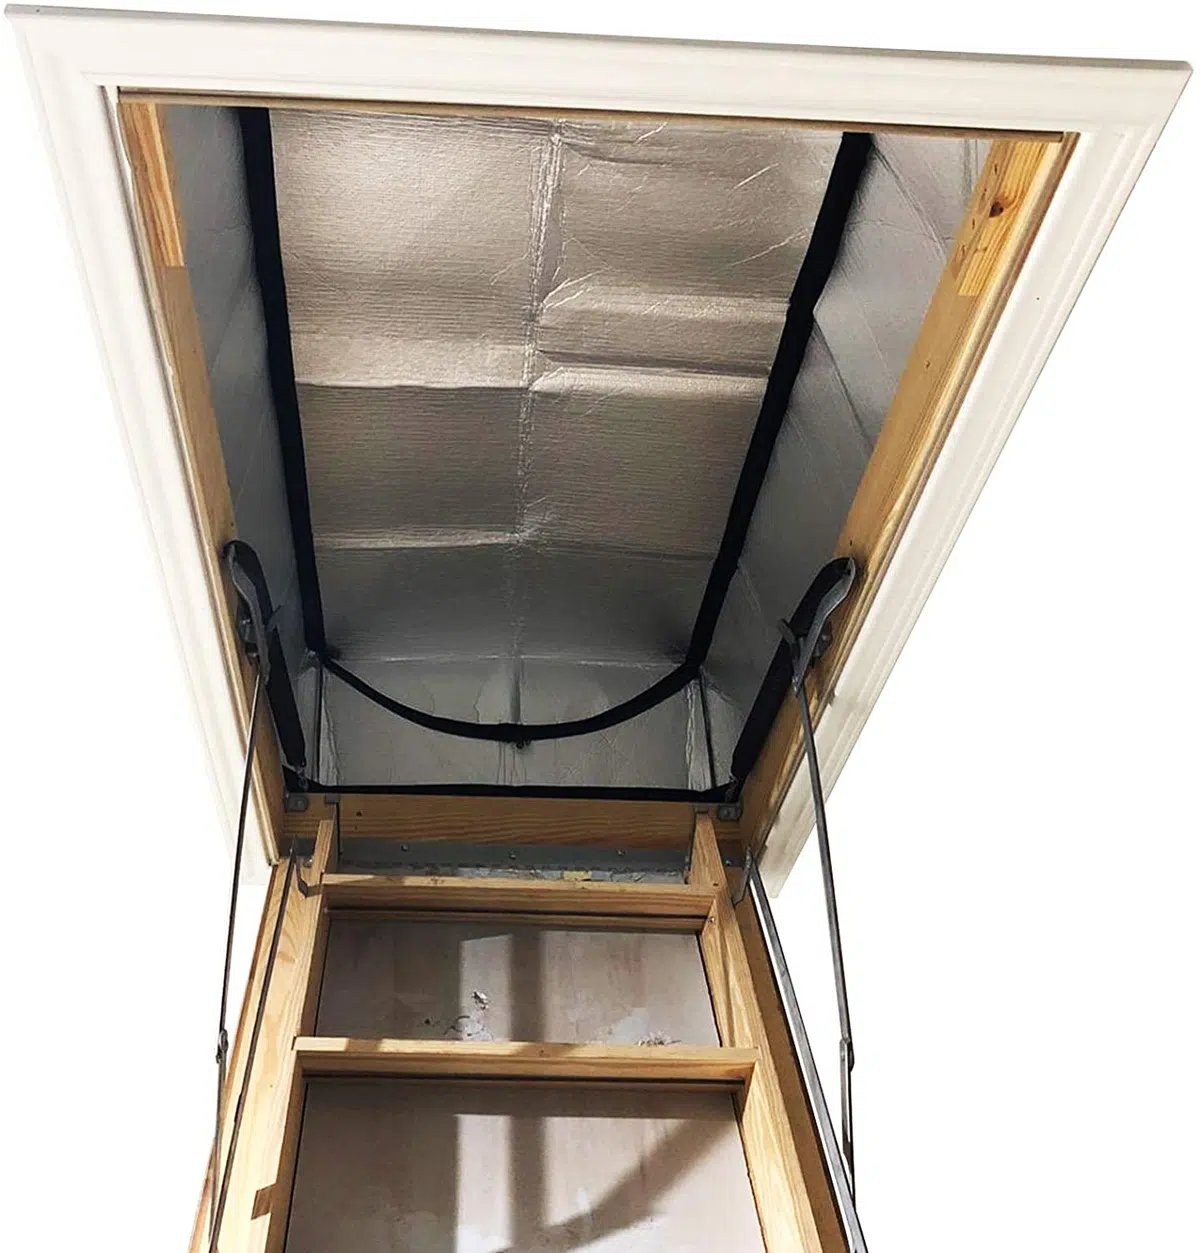 Attic Stairs Insulation Cover